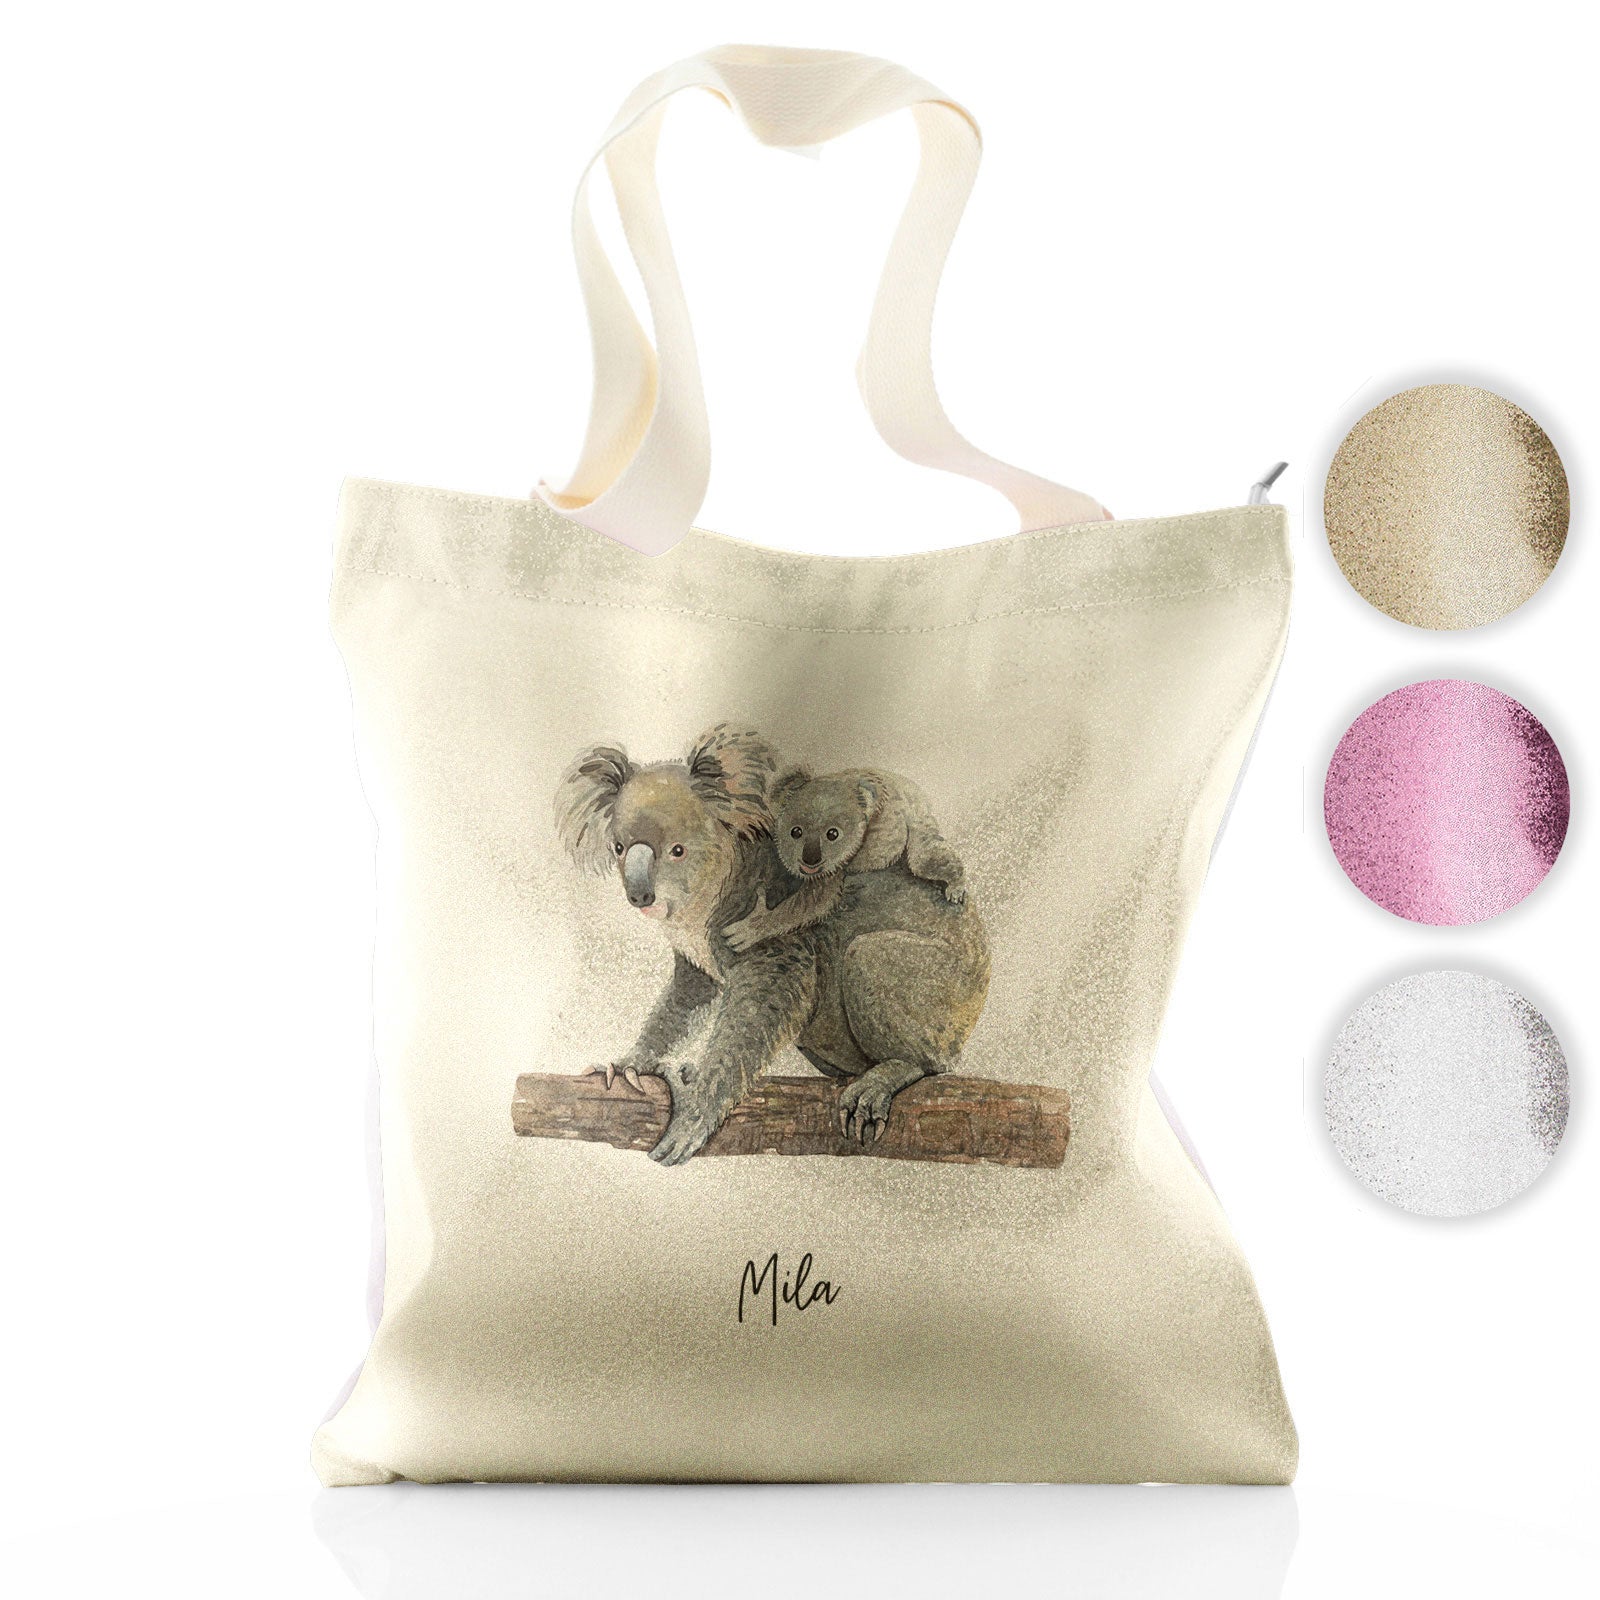 Personalised Glitter Tote Bag with Welcoming Text and Embracing Mum and Baby Koalas